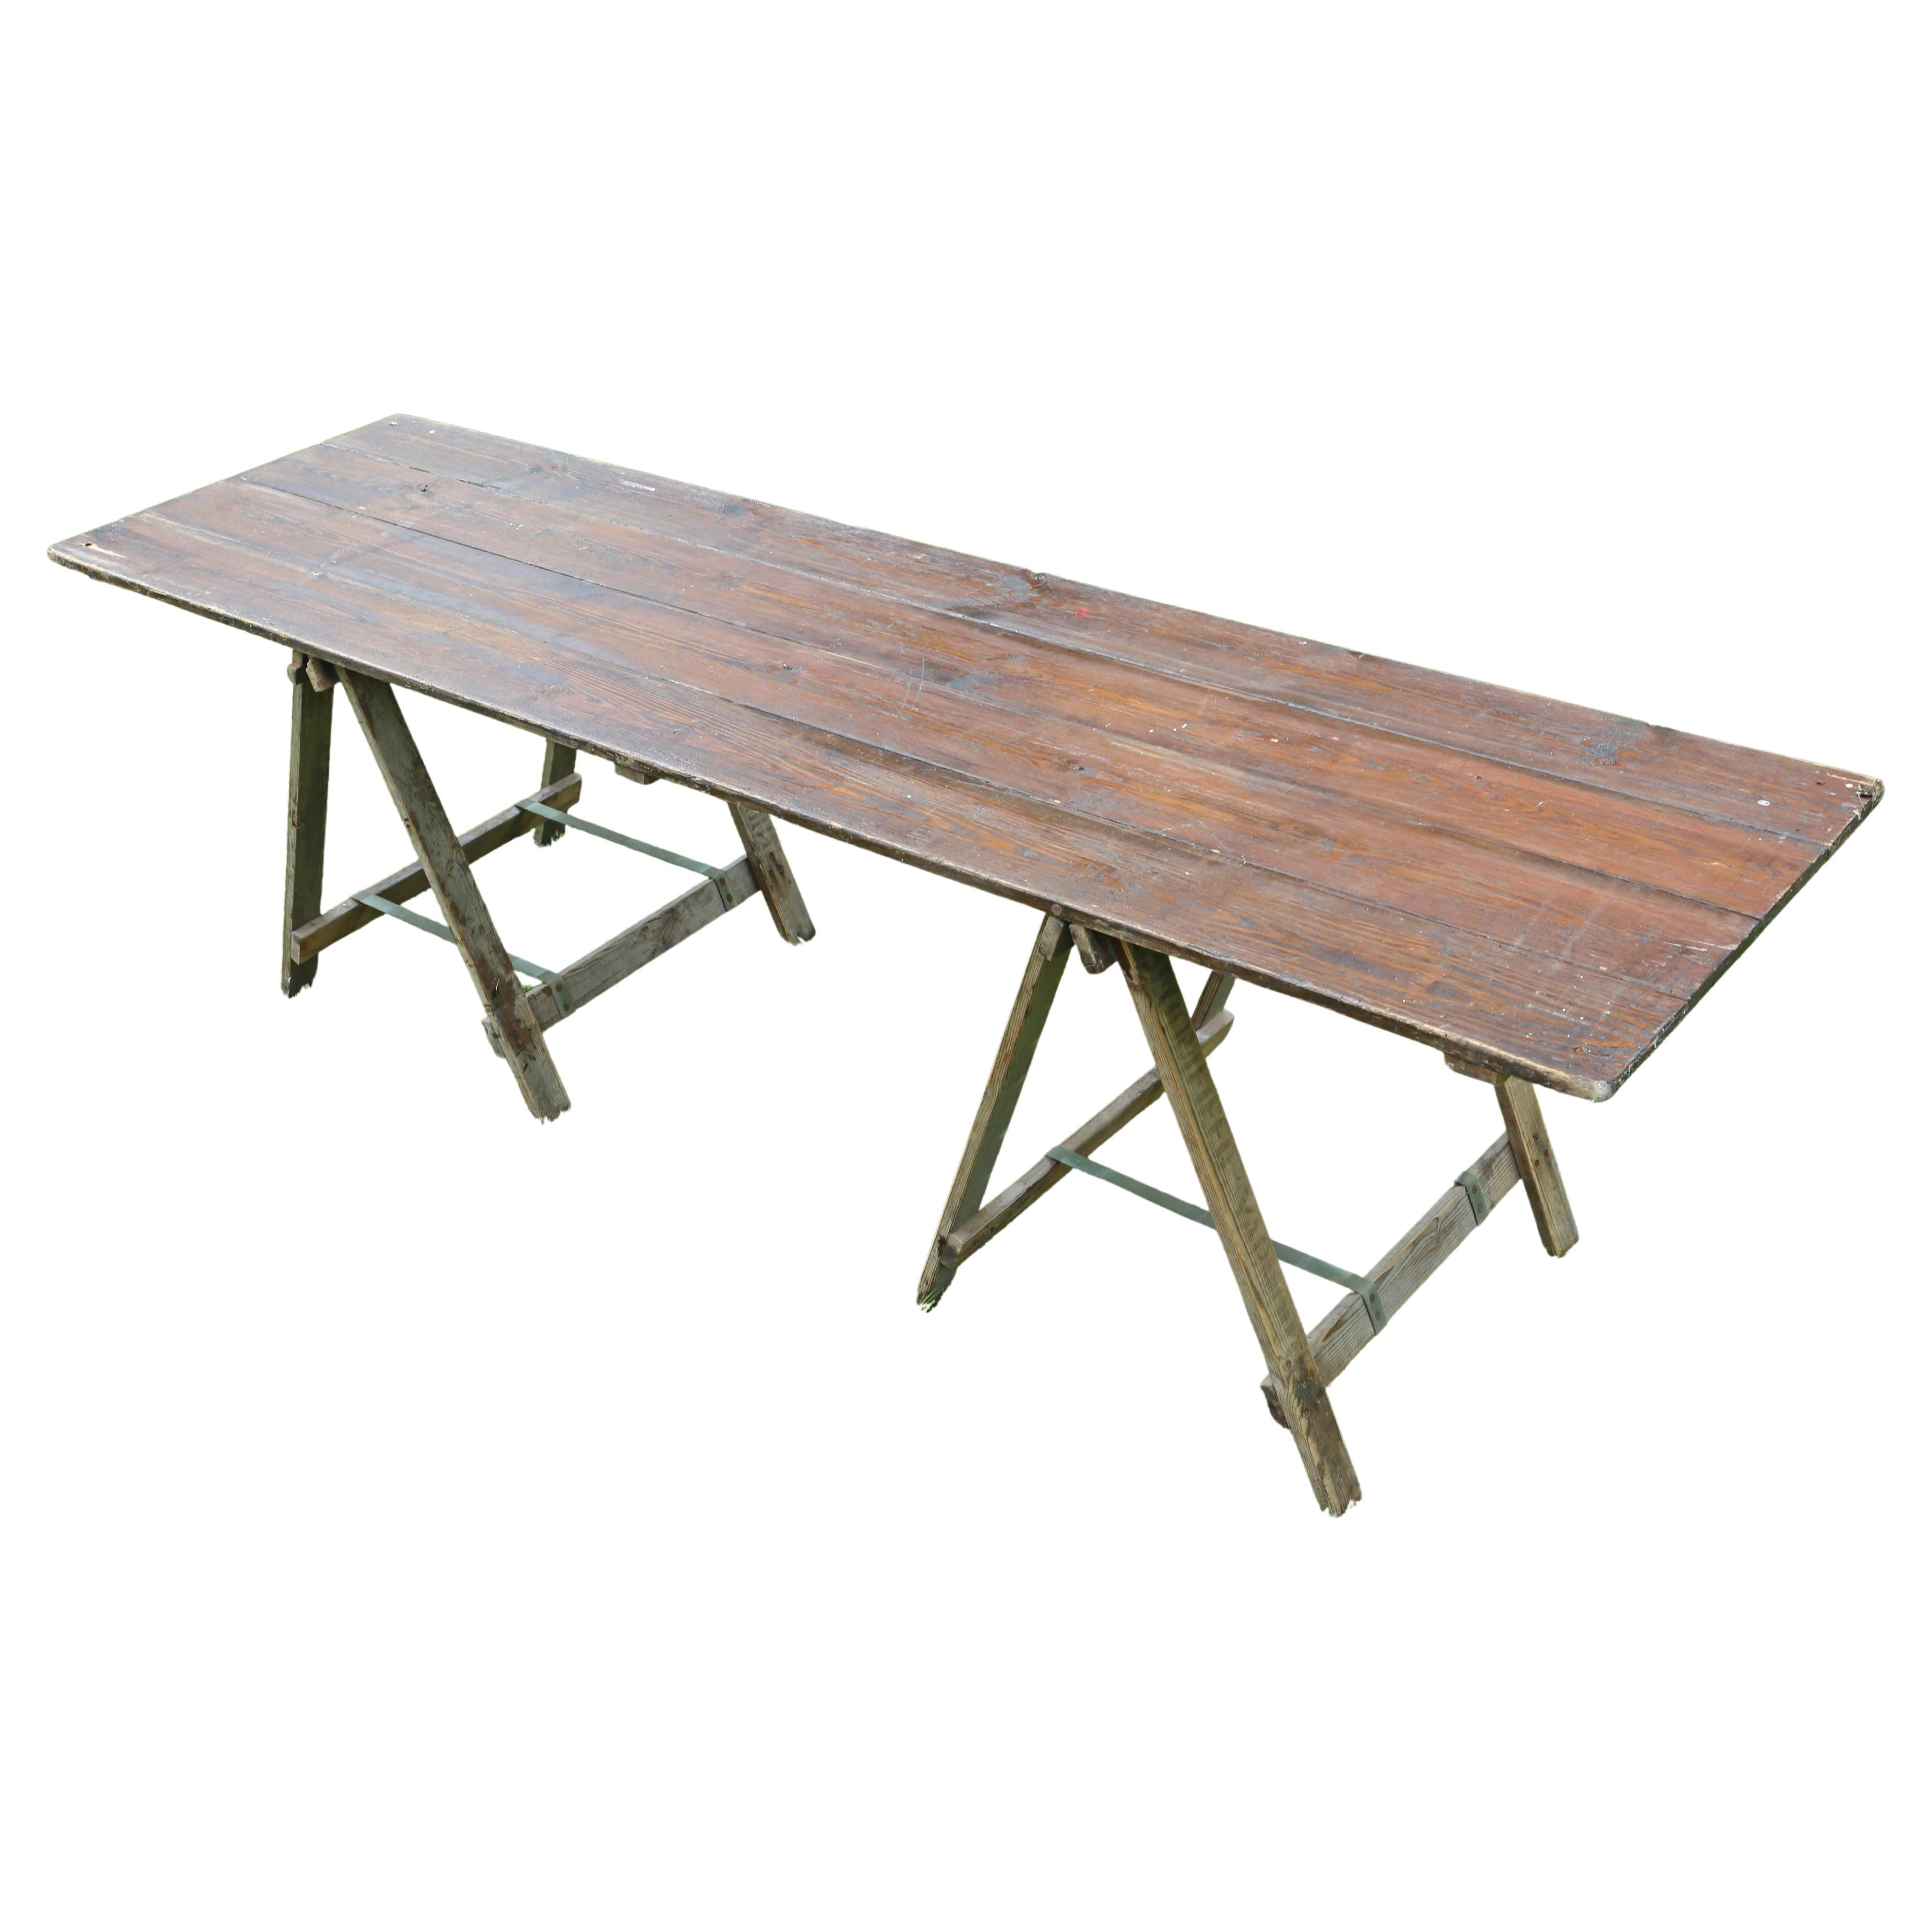 Antique vintage trestle refectory kitchen, garden or dining table.

Dates from the mid 20th Century. Procured from a marquee company, who specialised in vintage weddings.

Solid, with no loose joints and in good working order. Top lifts off and